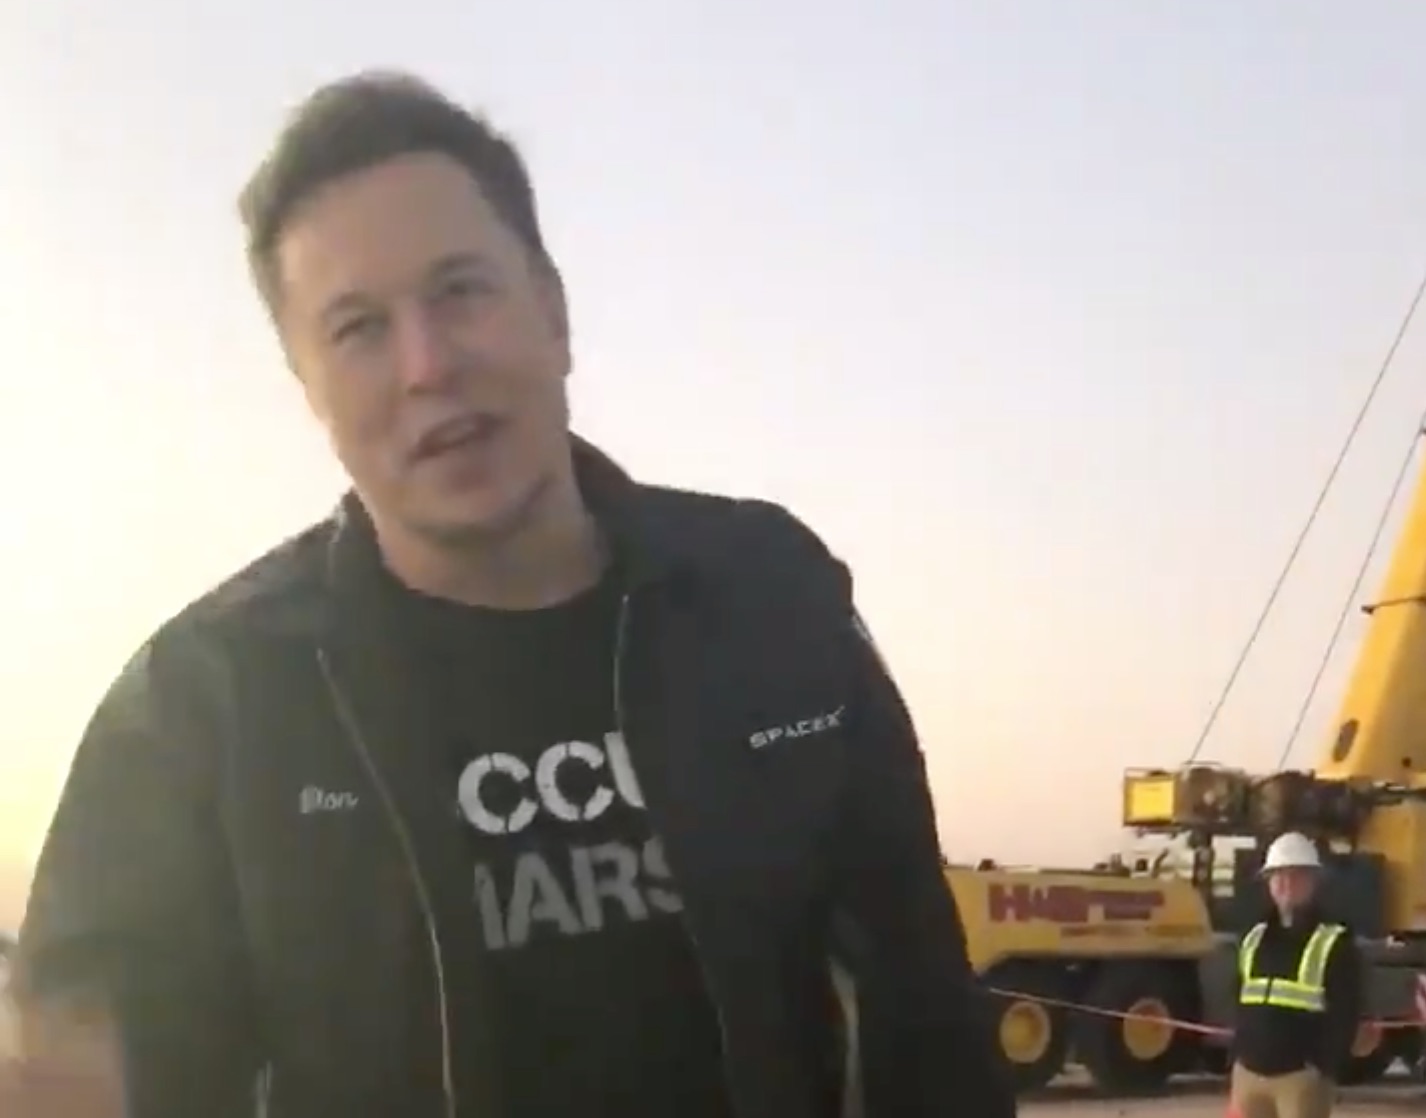 elon musk spacex career day boca chica